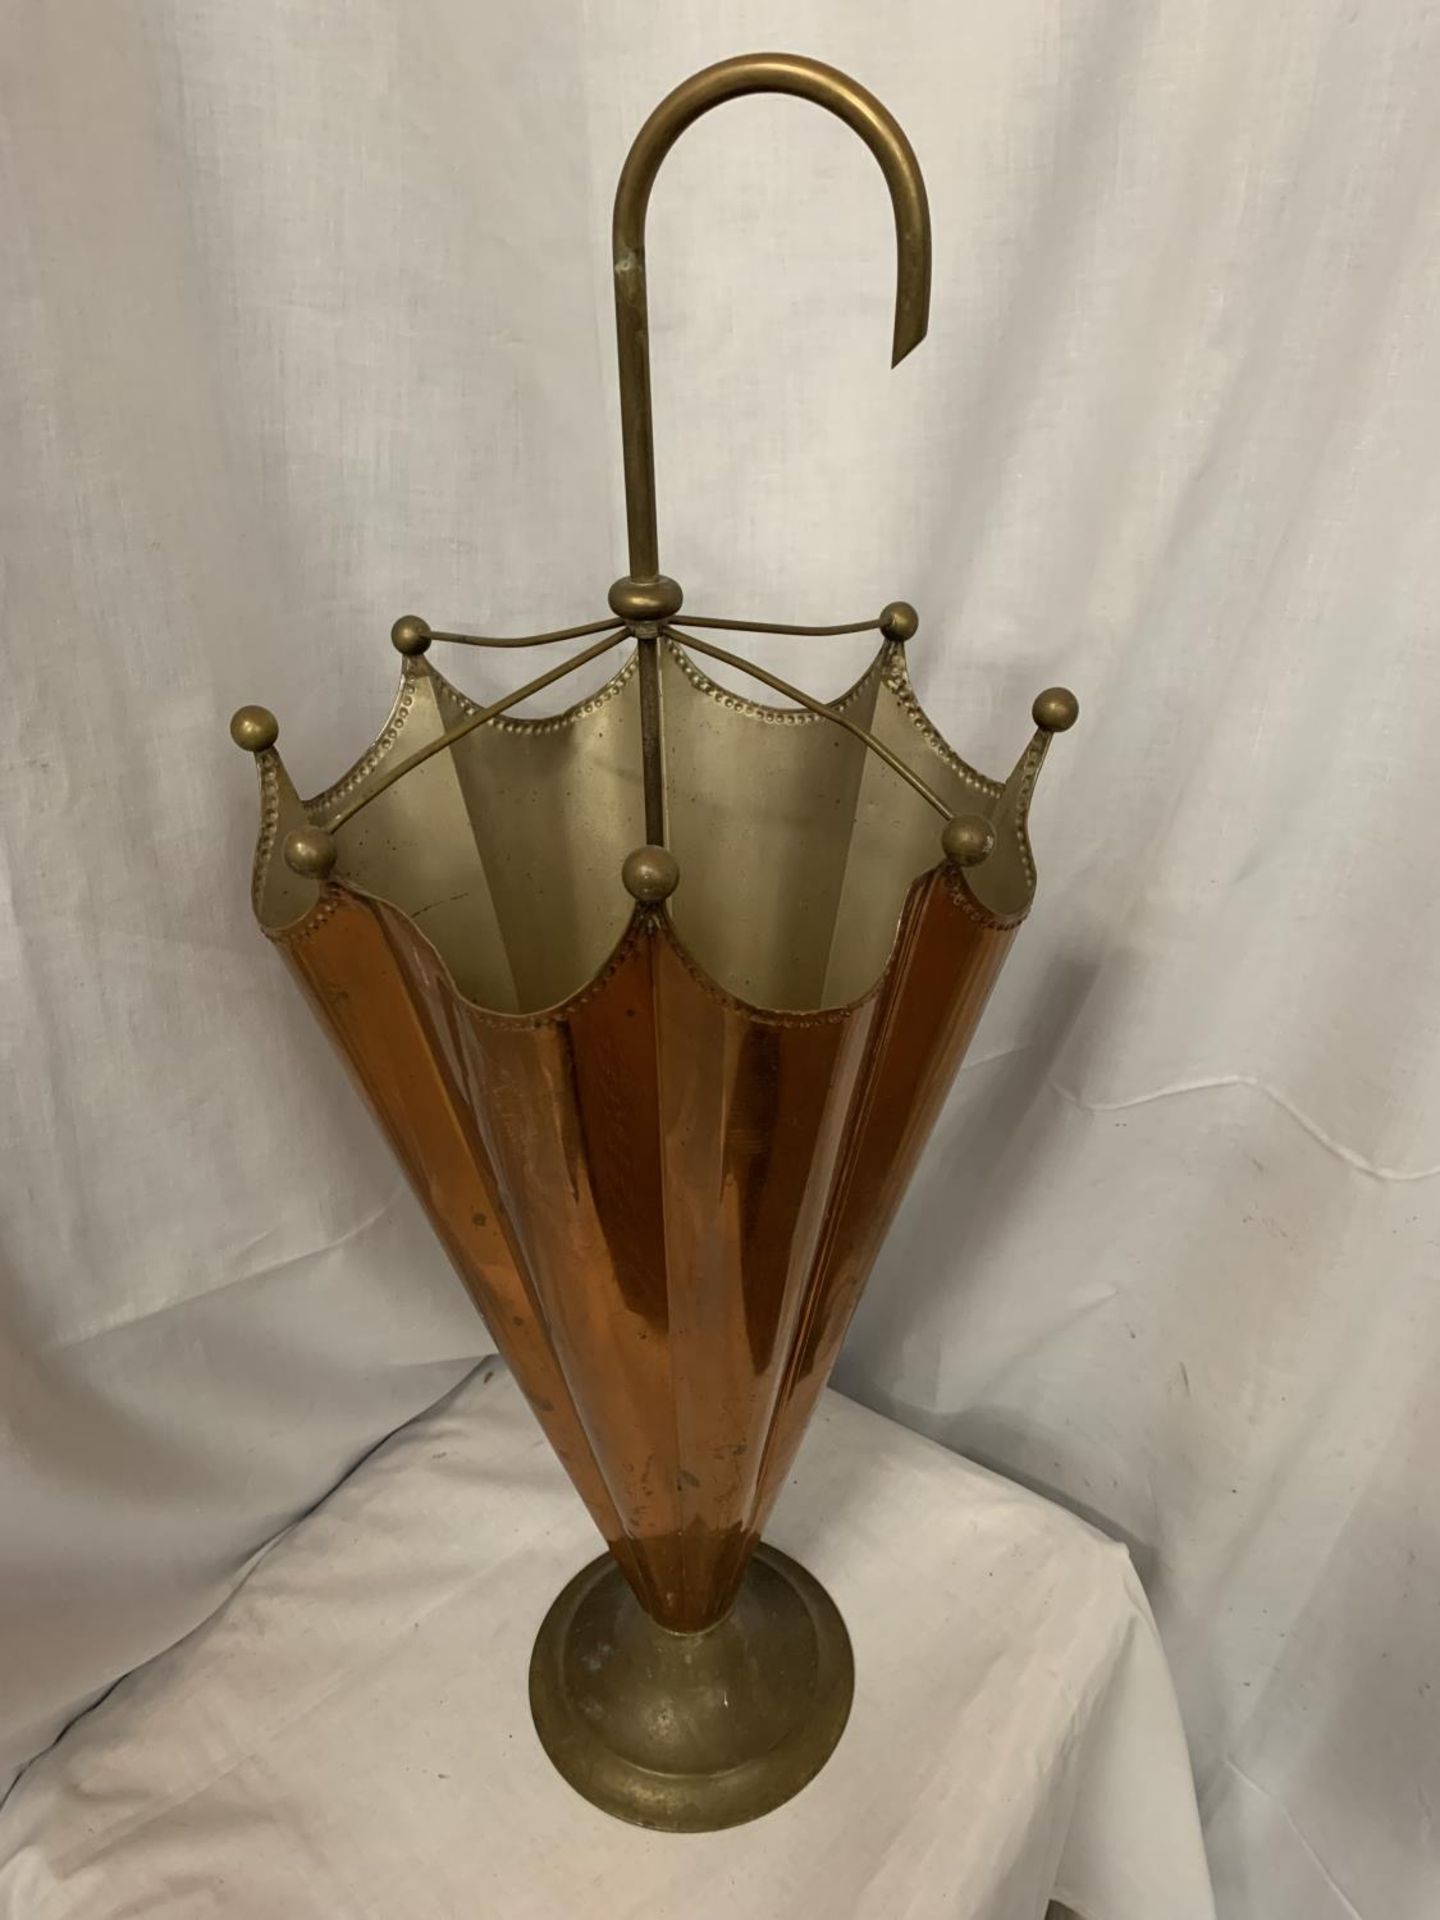 AN UNUSUAL COPPER AND BRASS UMBRELLA STAND IN THE FORM OF AN UMBRELLA